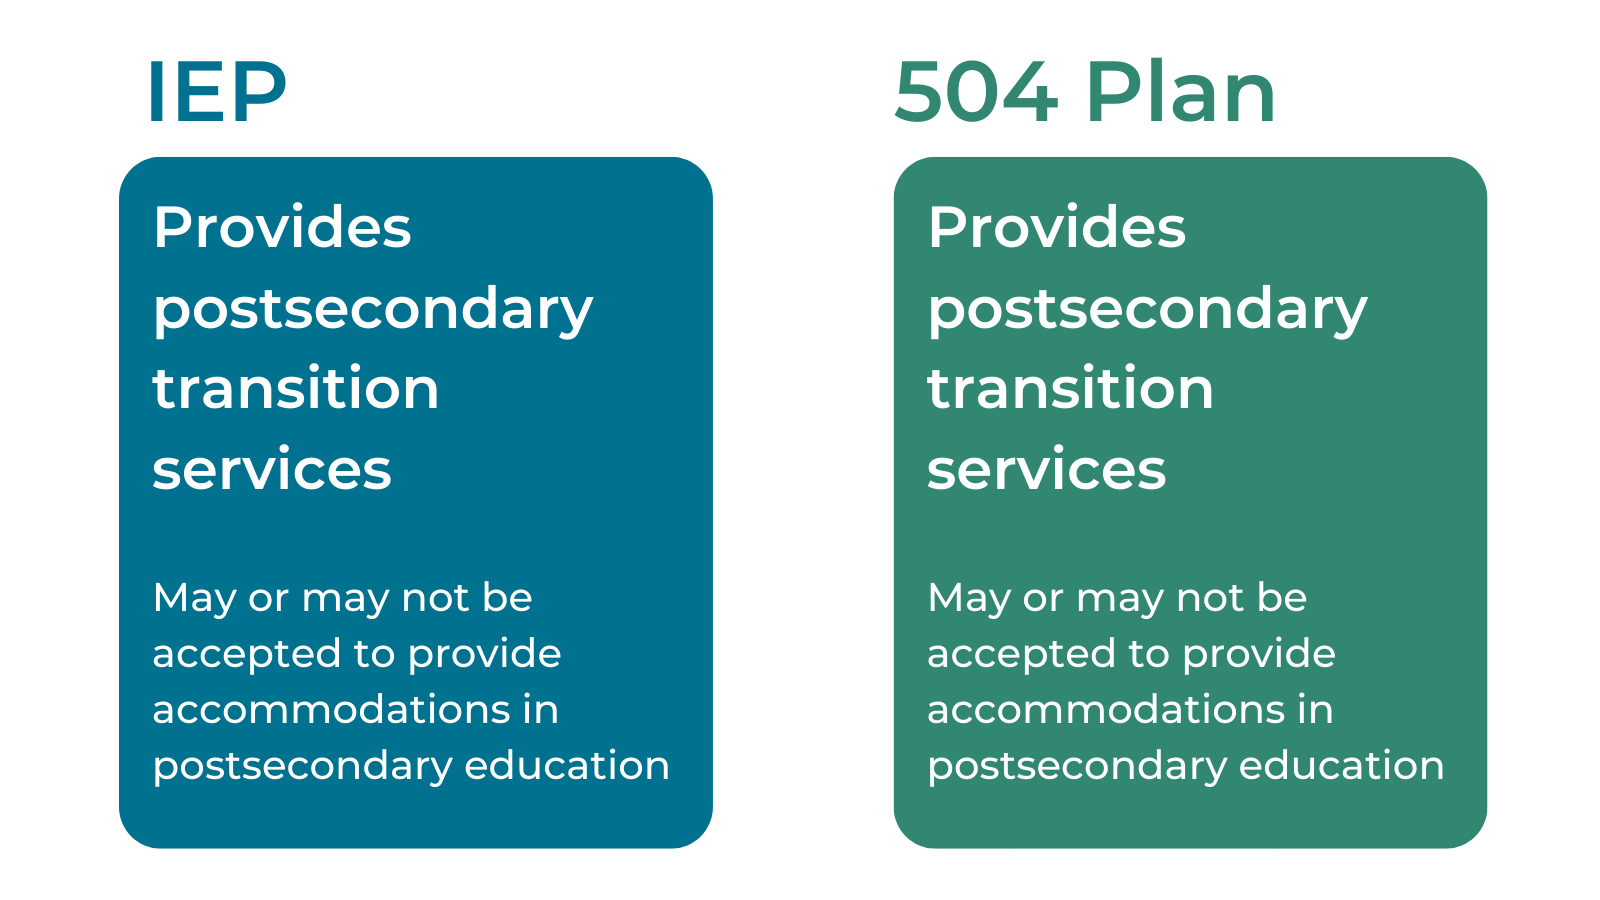 IEP: Provides postsecondary transition services, may or may not be accepted to provide accommodations in postsecondary education

504 Plan: Provides postsecondary transition services, may or may not be accepted to provide accommodations in postsecondary education